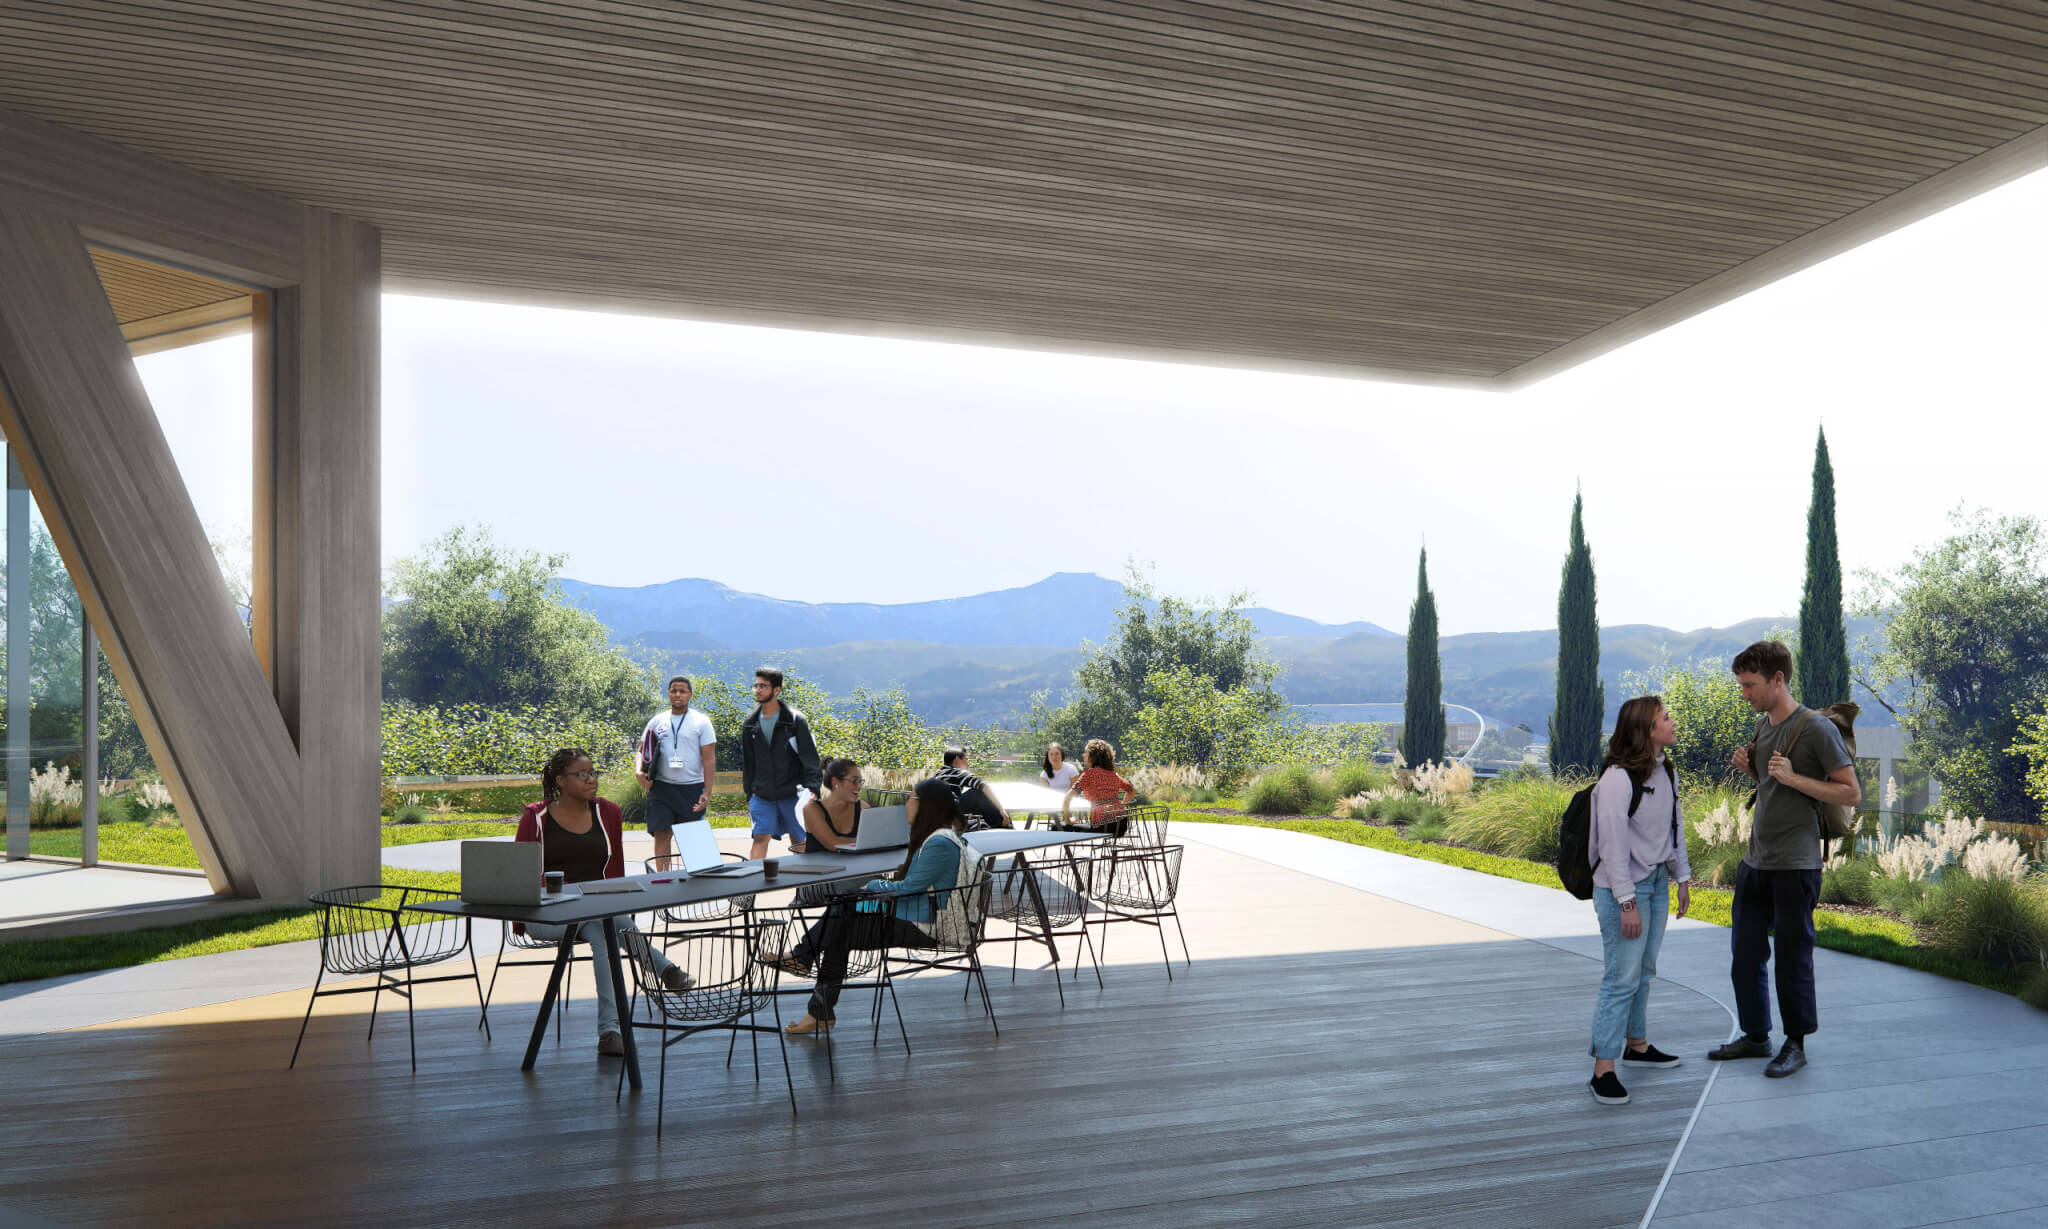 rendering of a covered outdoor terrace